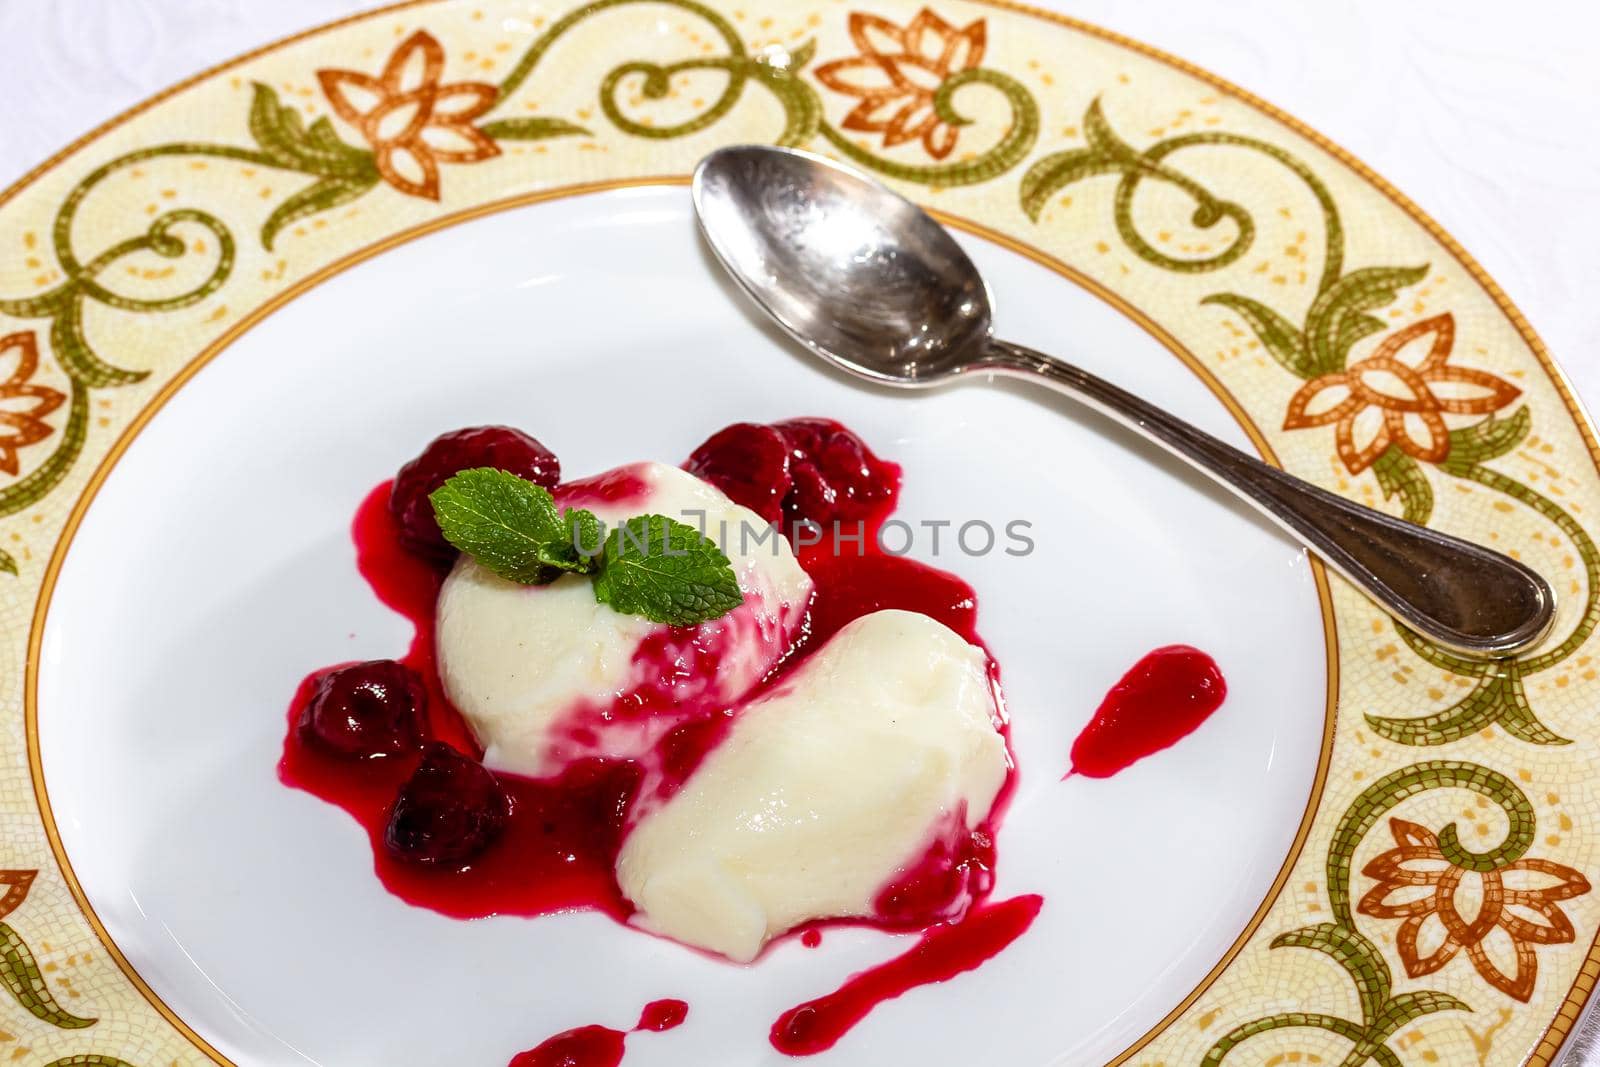 Panakota with cherry jelly and mint leaves on a white background by Milanchikov